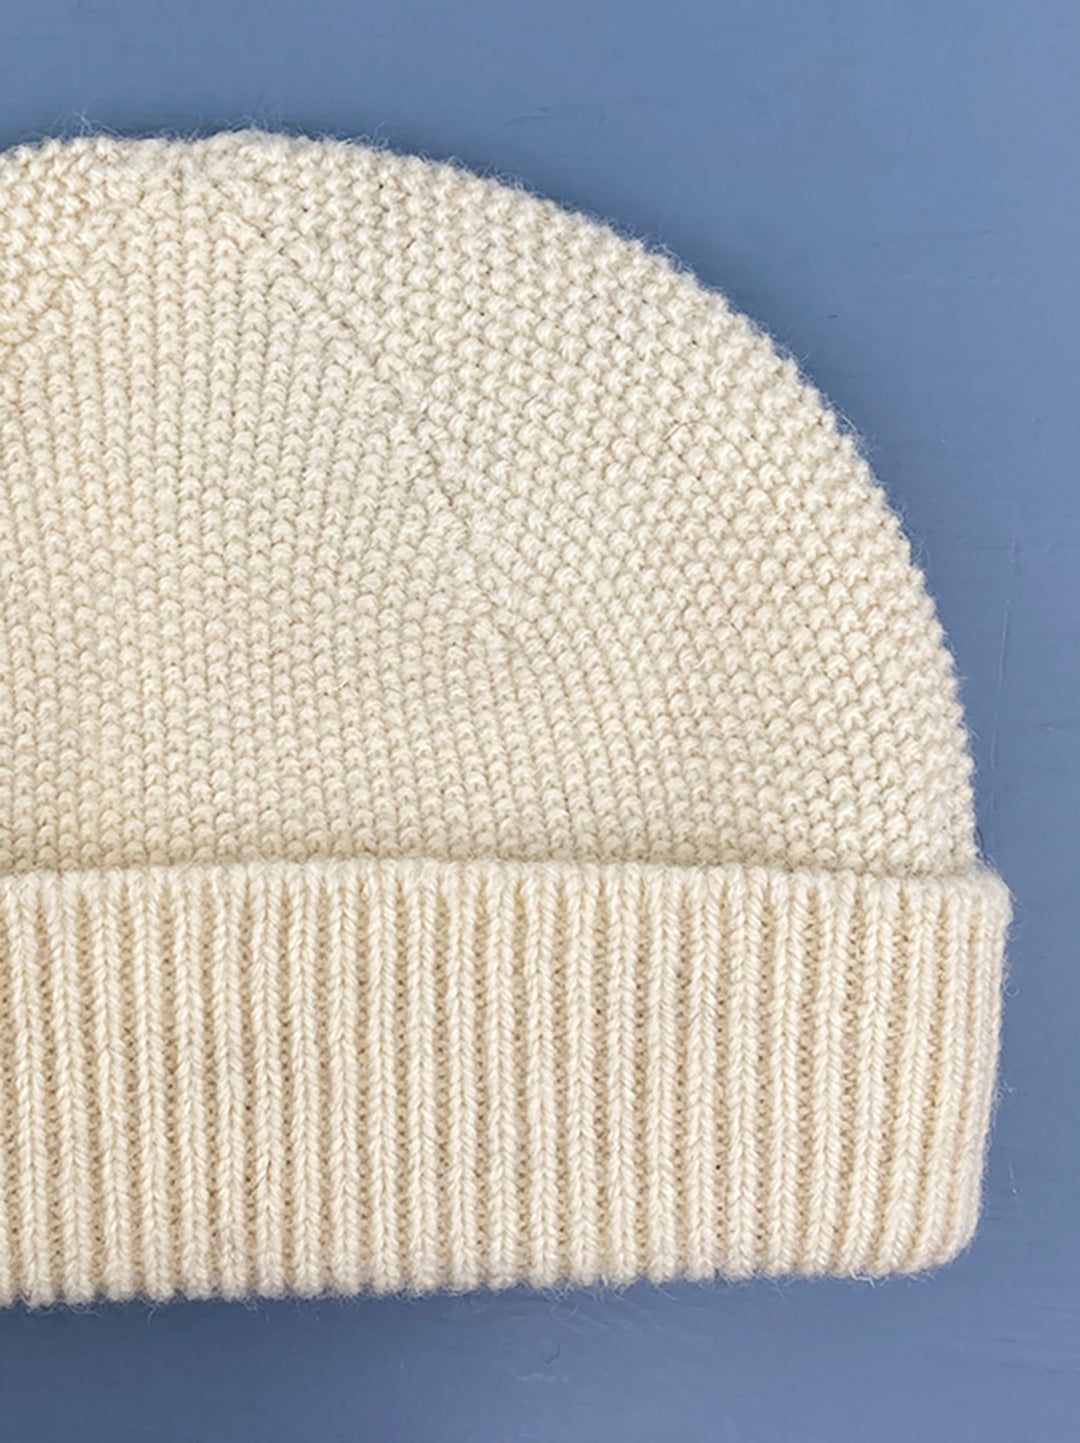 Cuillin hat in undyed natural white British wool.